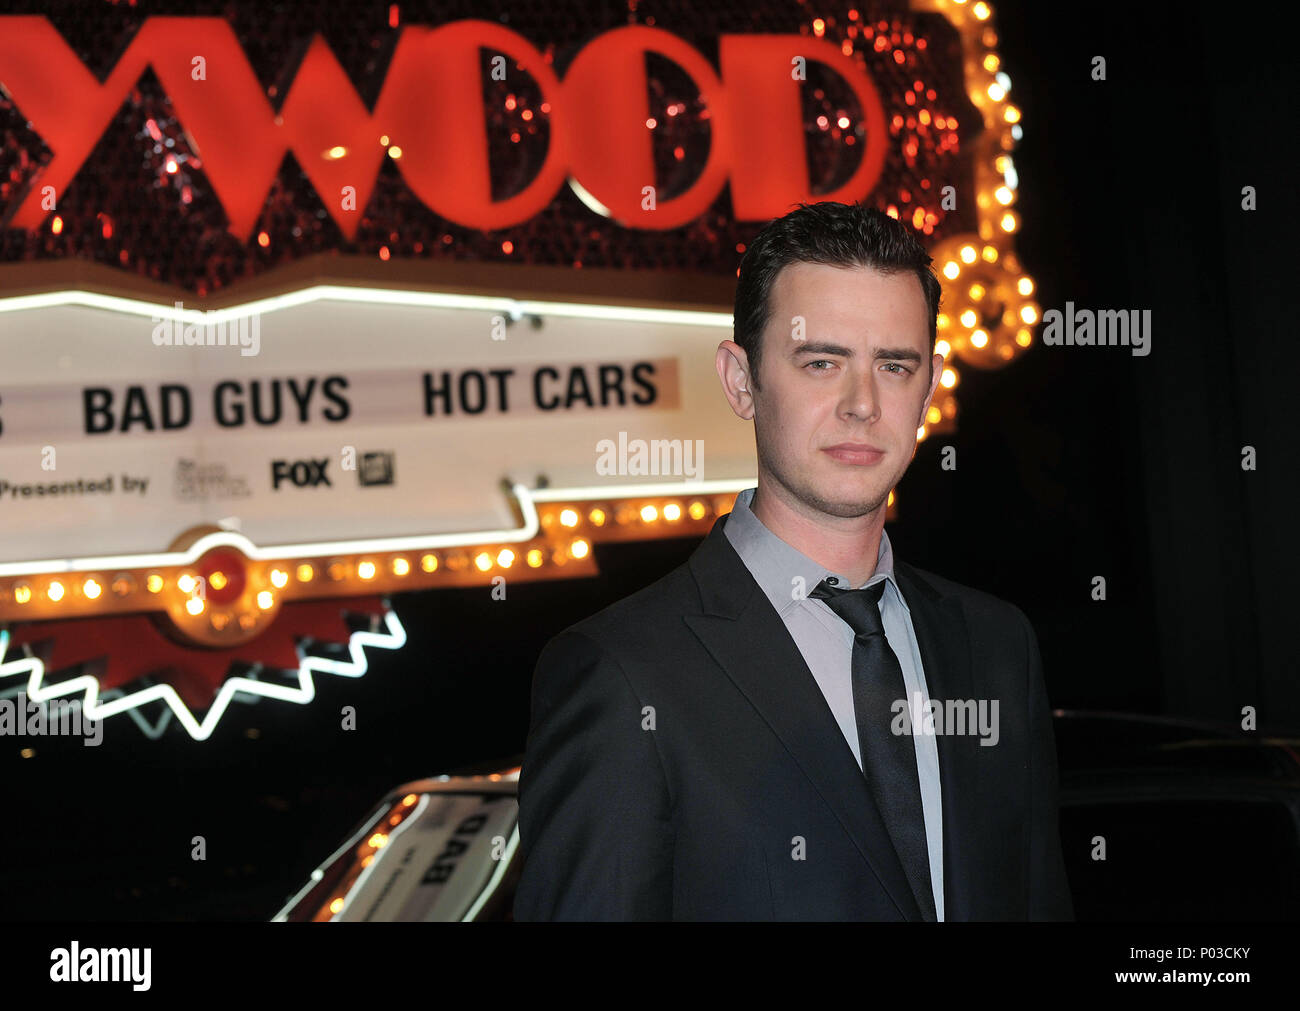 04  Colin Hanks  04   - The Good Guys, Bad Guys, Hot Cars at the  Petersen Automotive Museum In Los Angeles.04  Colin Hanks  04 Red Carpet Event, Vertical, USA, Film Industry, Celebrities,  Photography, Bestof, Arts Culture and Entertainment, Topix Celebrities fashion /  Vertical, Best of, Event in Hollywood Life - California,  Red Carpet and backstage, USA, Film Industry, Celebrities,  movie celebrities, TV celebrities, Music celebrities, Photography, Bestof, Arts Culture and Entertainment,  Topix, vertical, one person,, from the year , 2010, inquiry tsuni@Gamma-USA.com - Three Quarters Stock Photo